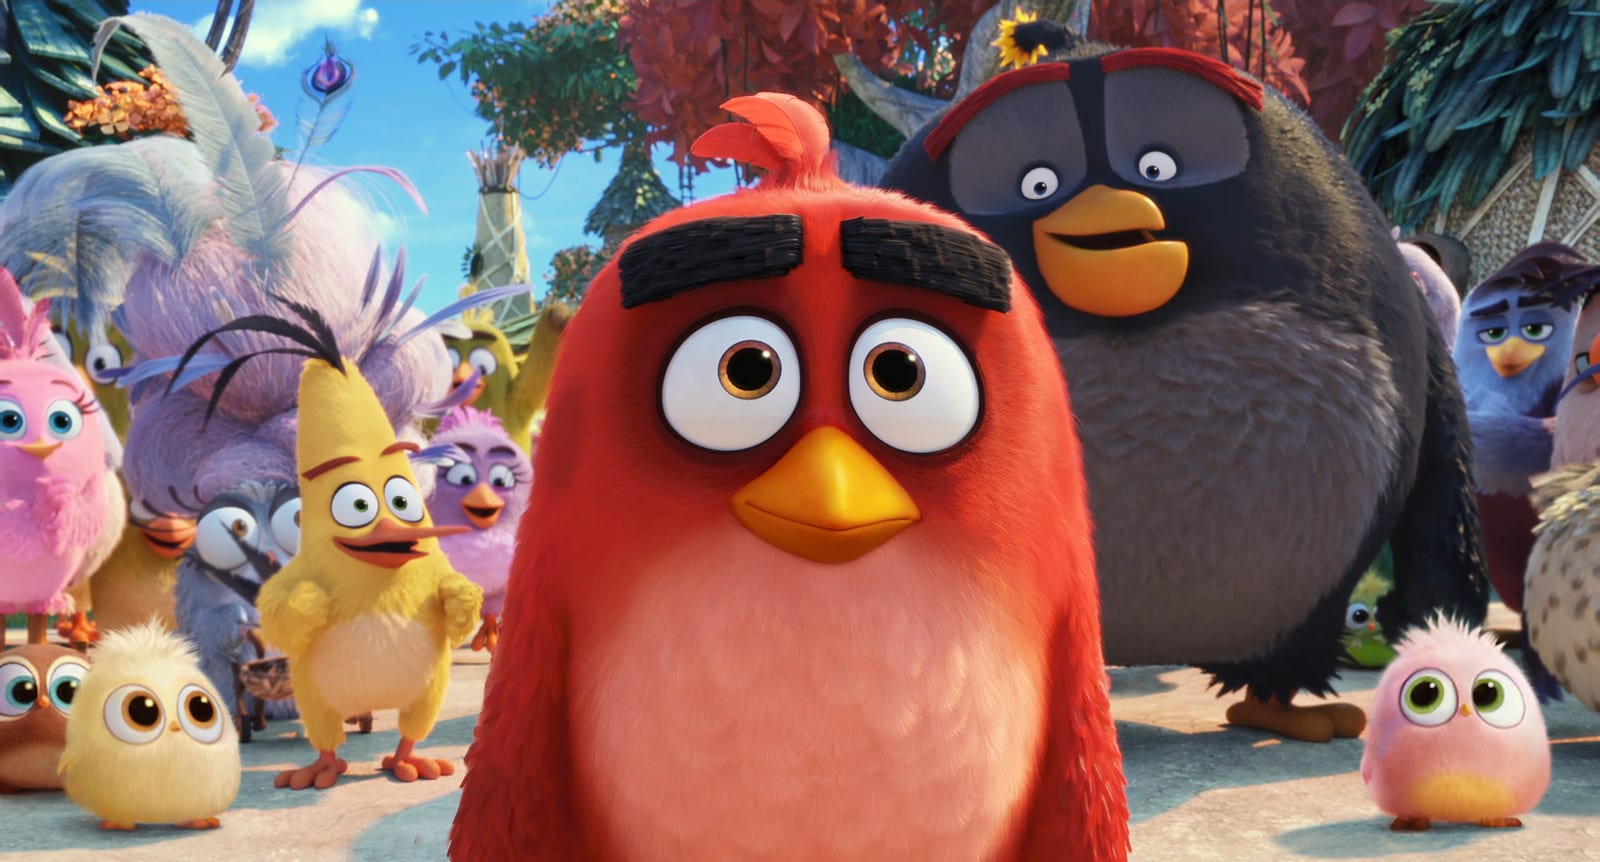 friends in the angry birds movie